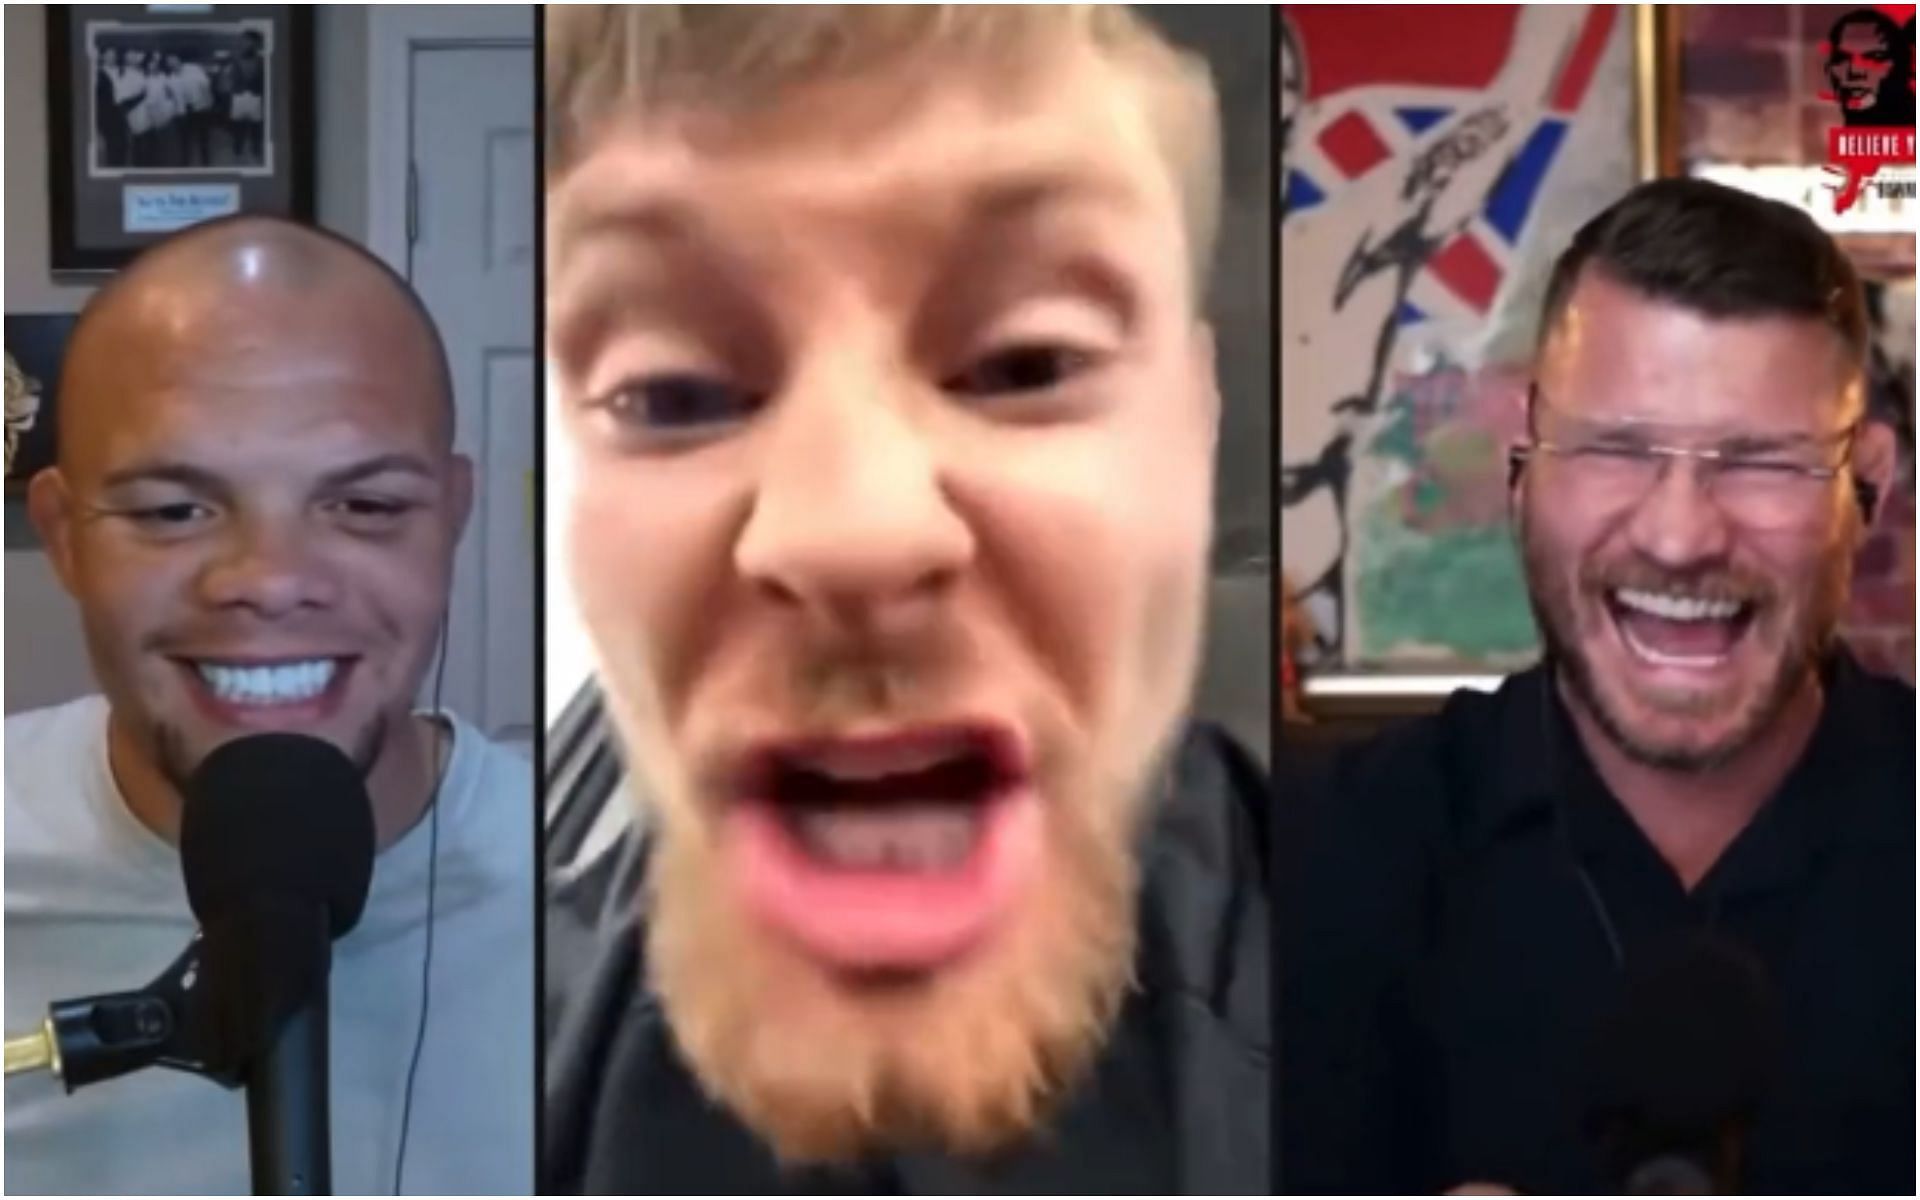 Anthony Smith, Bryce Mitchell and Michael Bisping